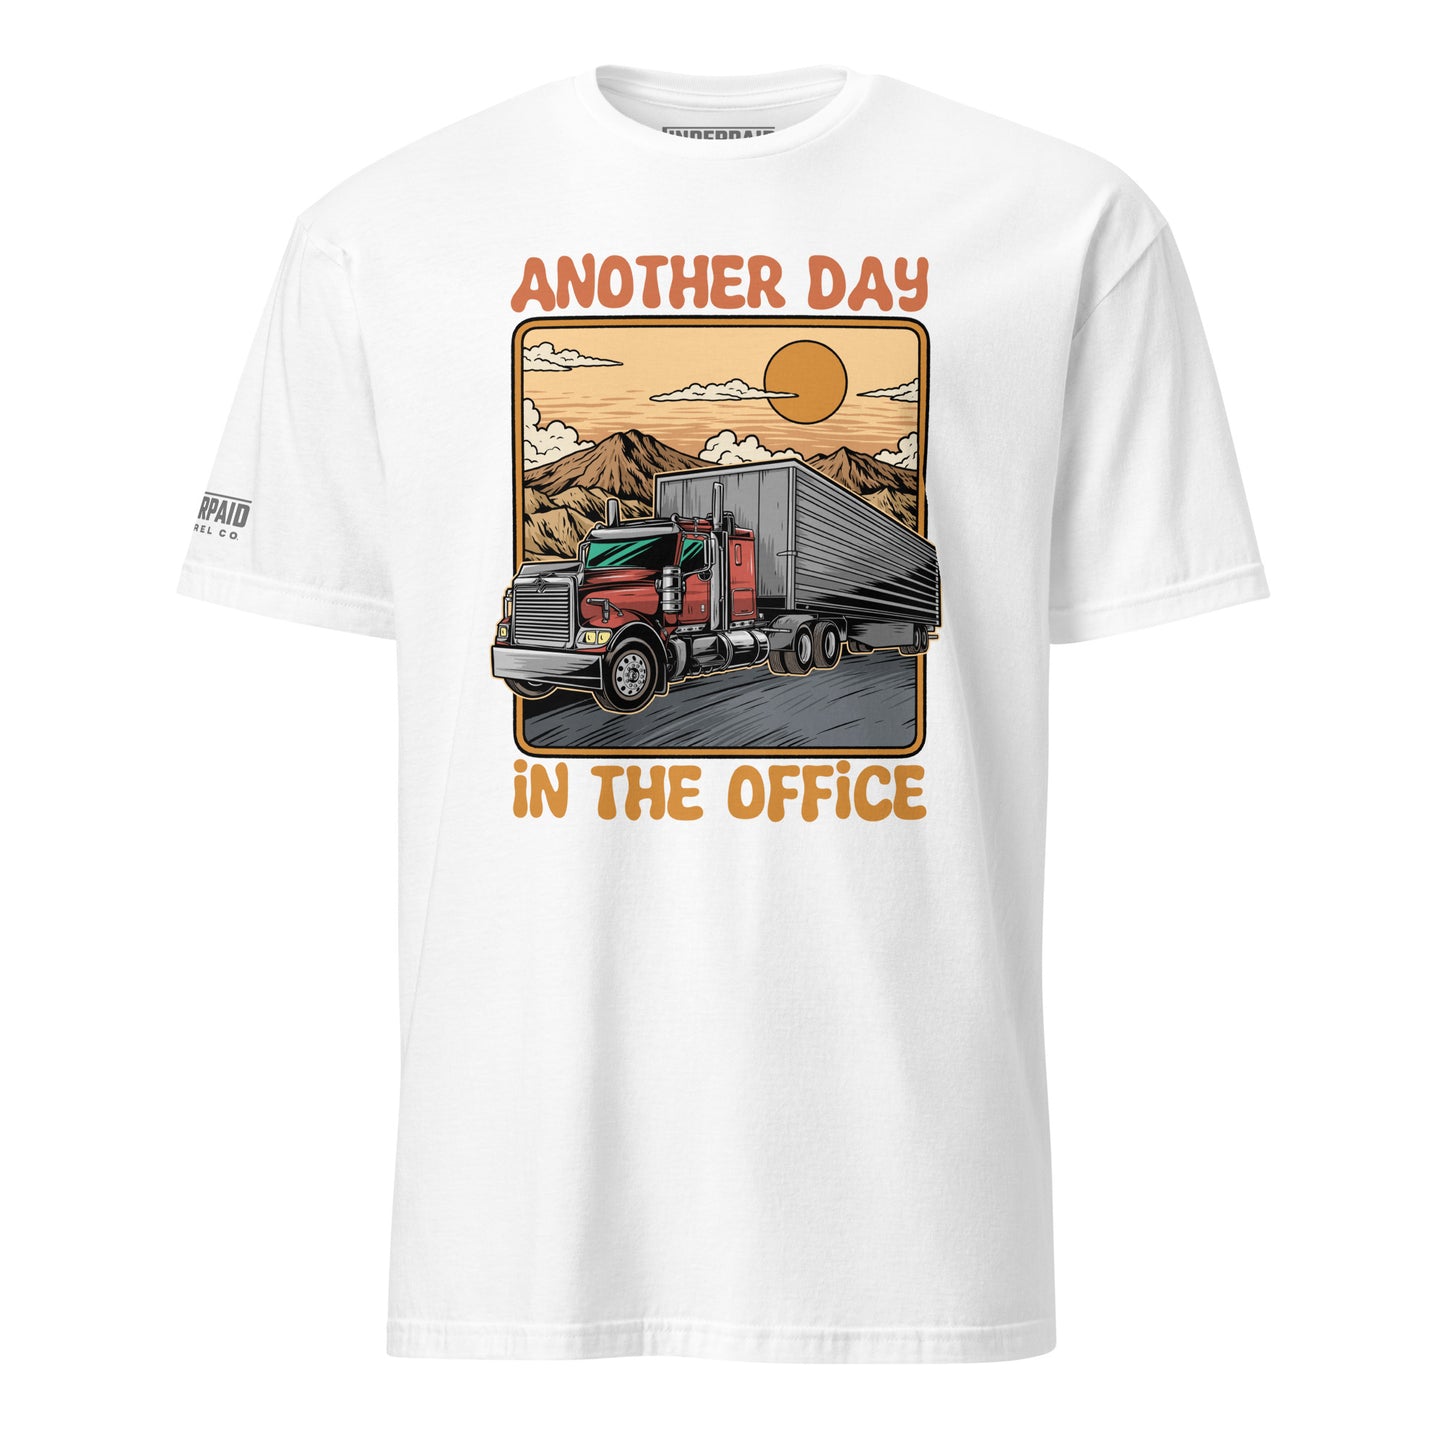 Day In The Office short sleeve graphic tee featuring full color design